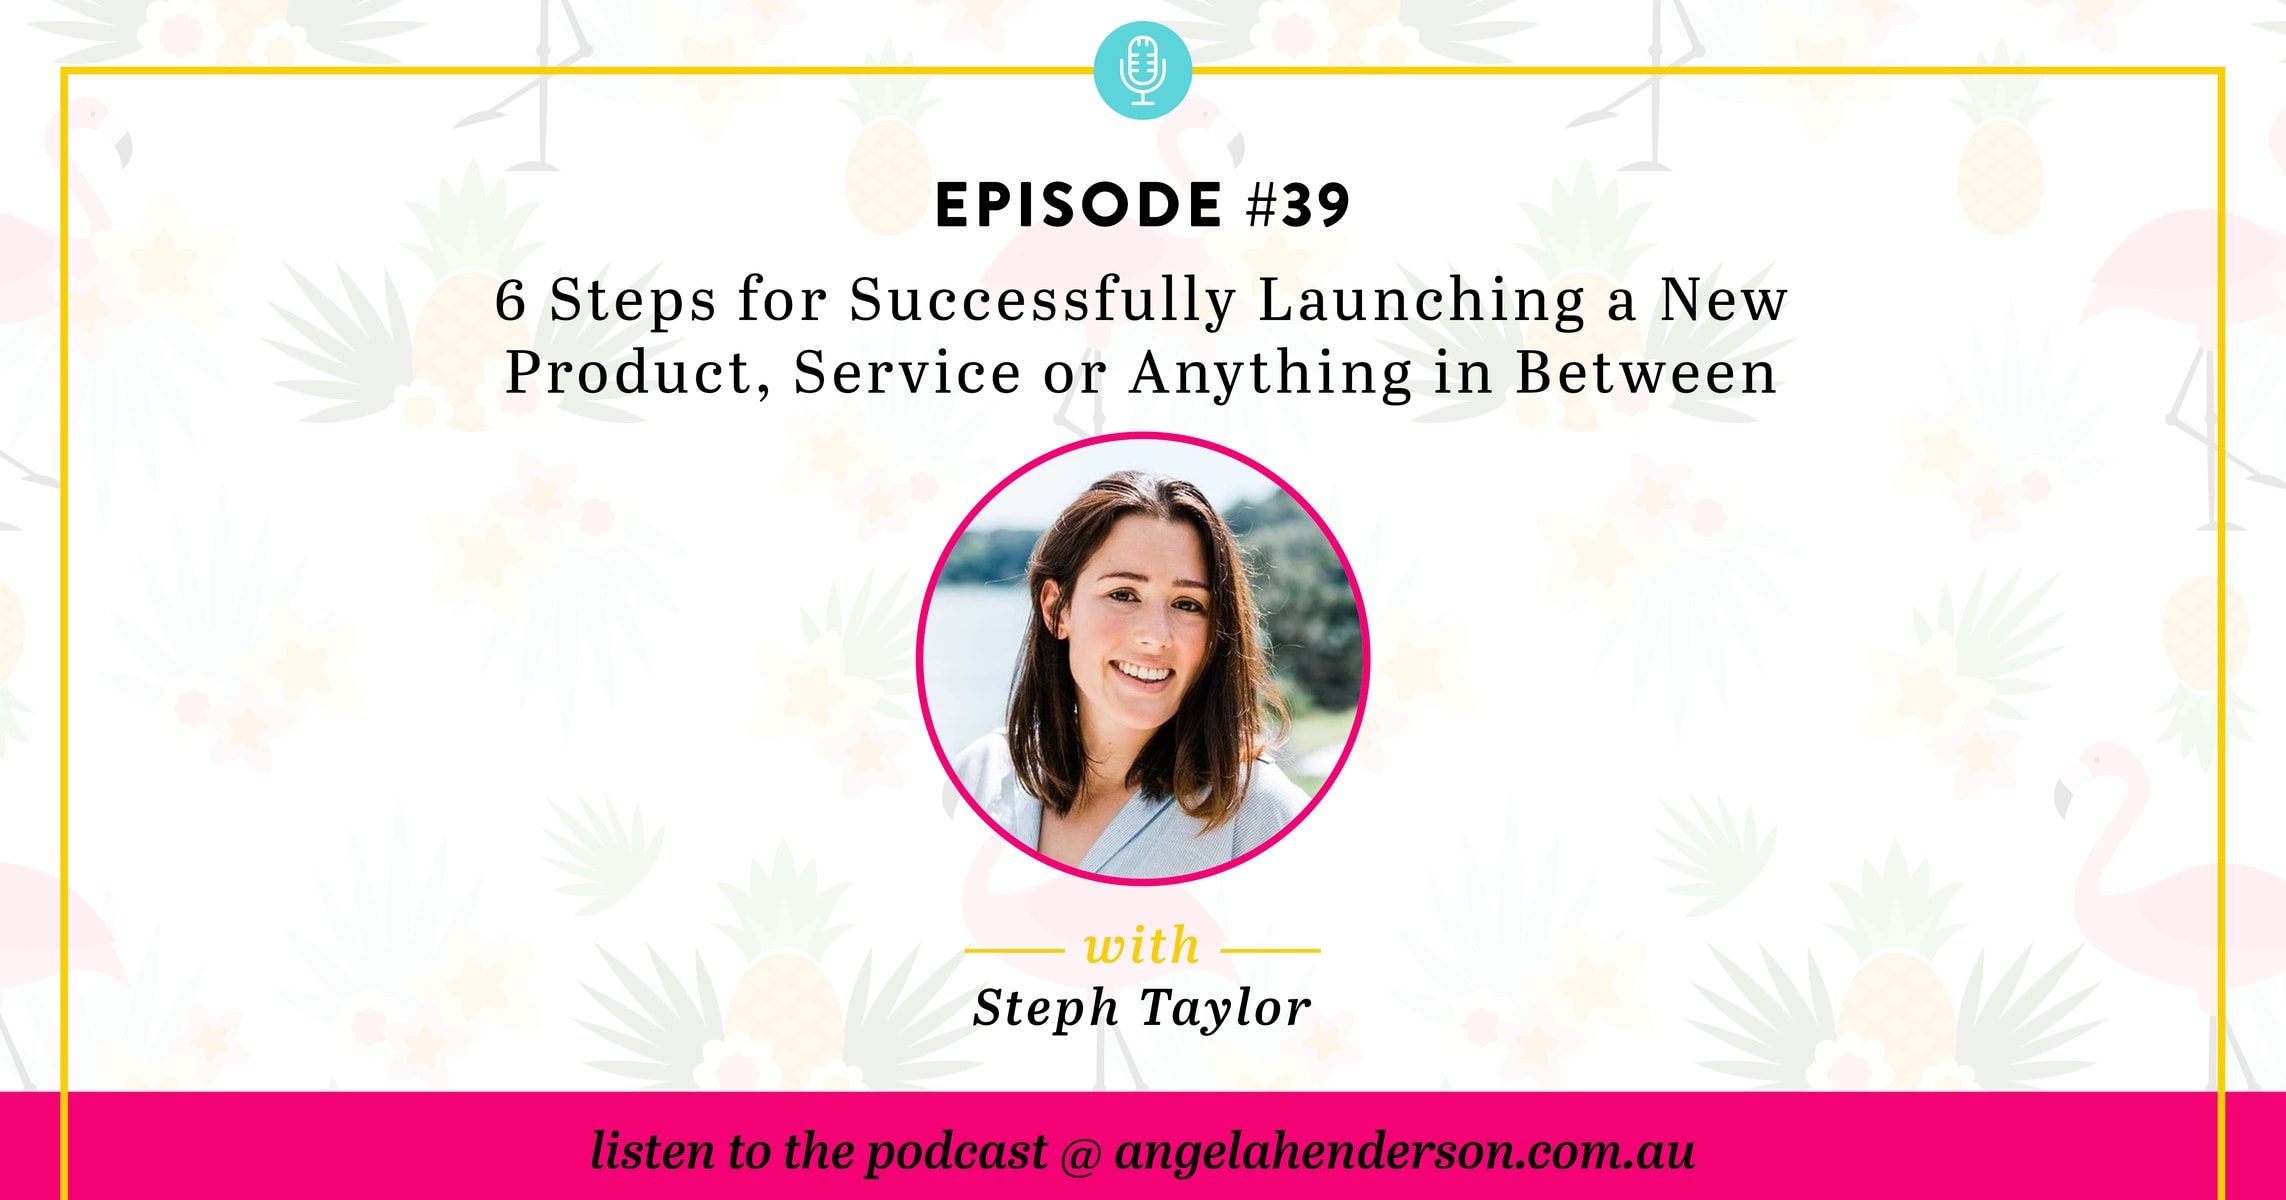 6 Steps for Successfully Launching a New Product, Service or Anything in Between